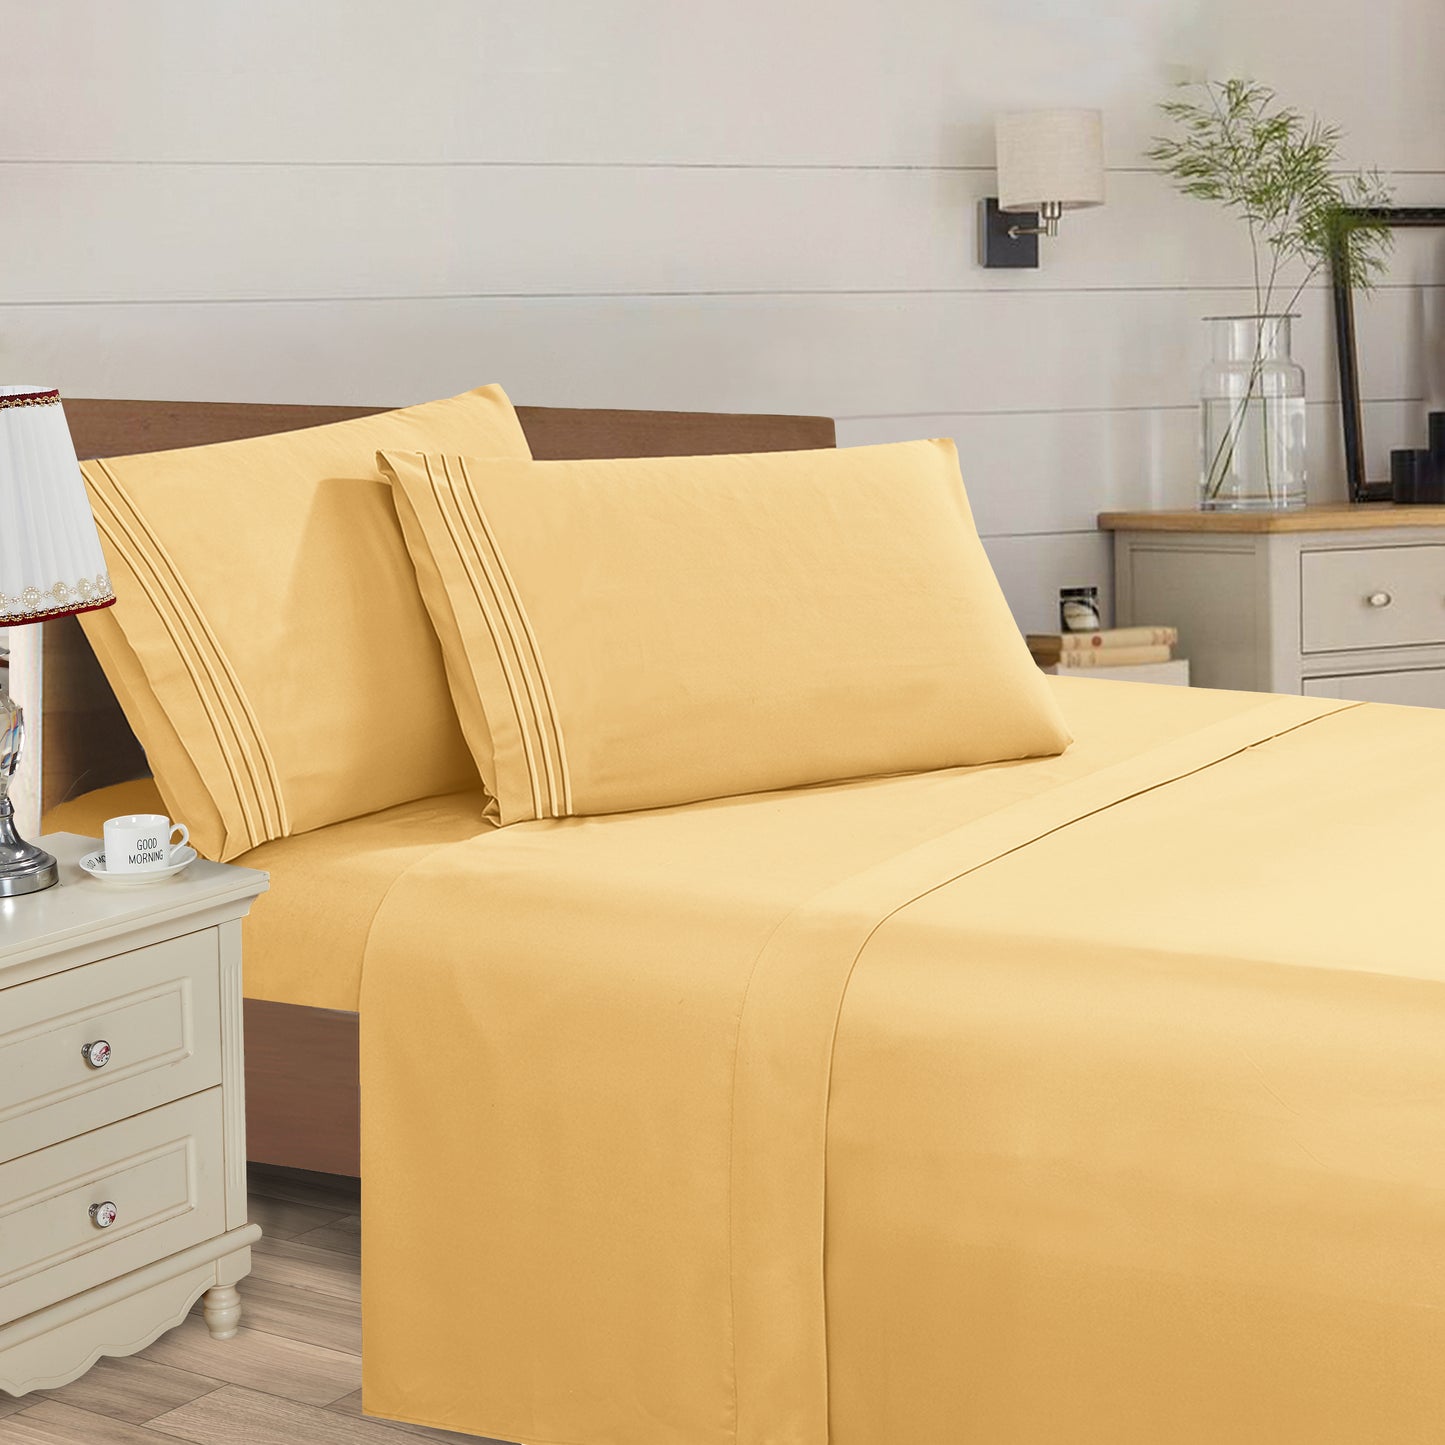 Elegant Comfort Essential Solid 3 Line Embroidery - Soft as a Hotel Premium Quality, 4-Piece Sheet Set, Bright Shades